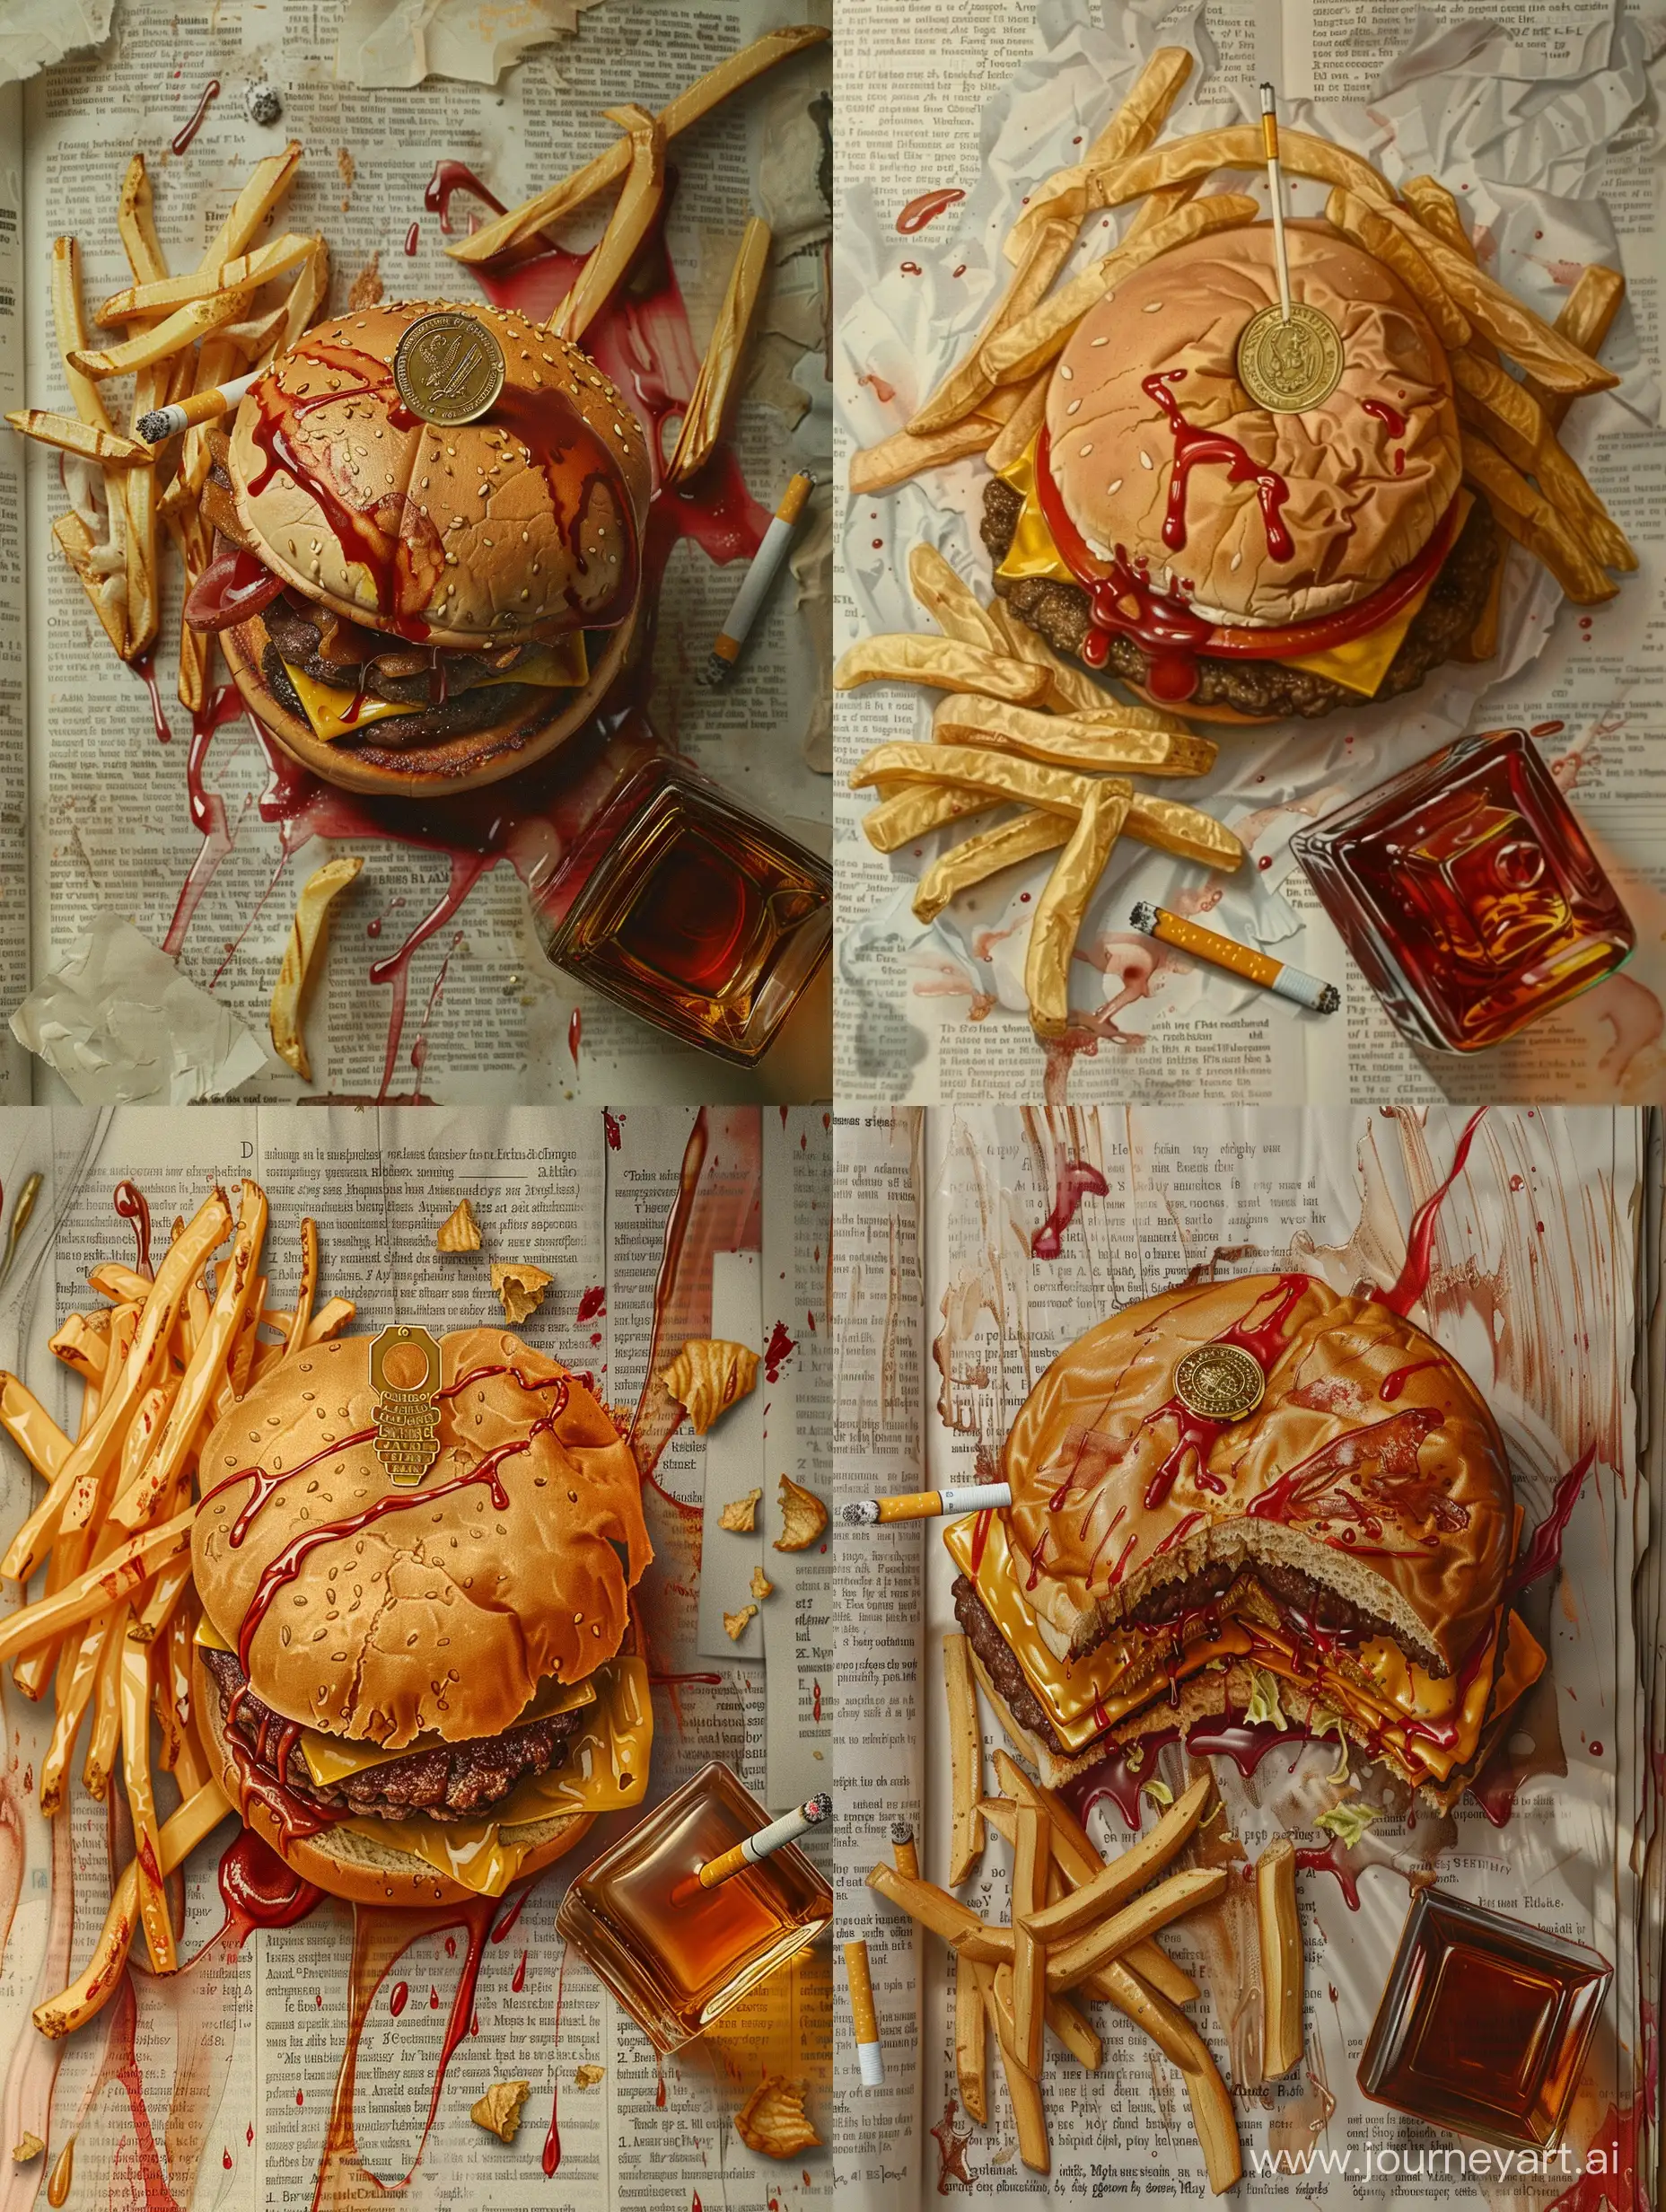 big fat burger with a half bitten medal on top, fries on a side. ketchup and mustard stains, cigarette butts lying around, big square glass of bourbon nearby, everything is standing on pages of manuscipt, view from above, no background, ralph steadman style